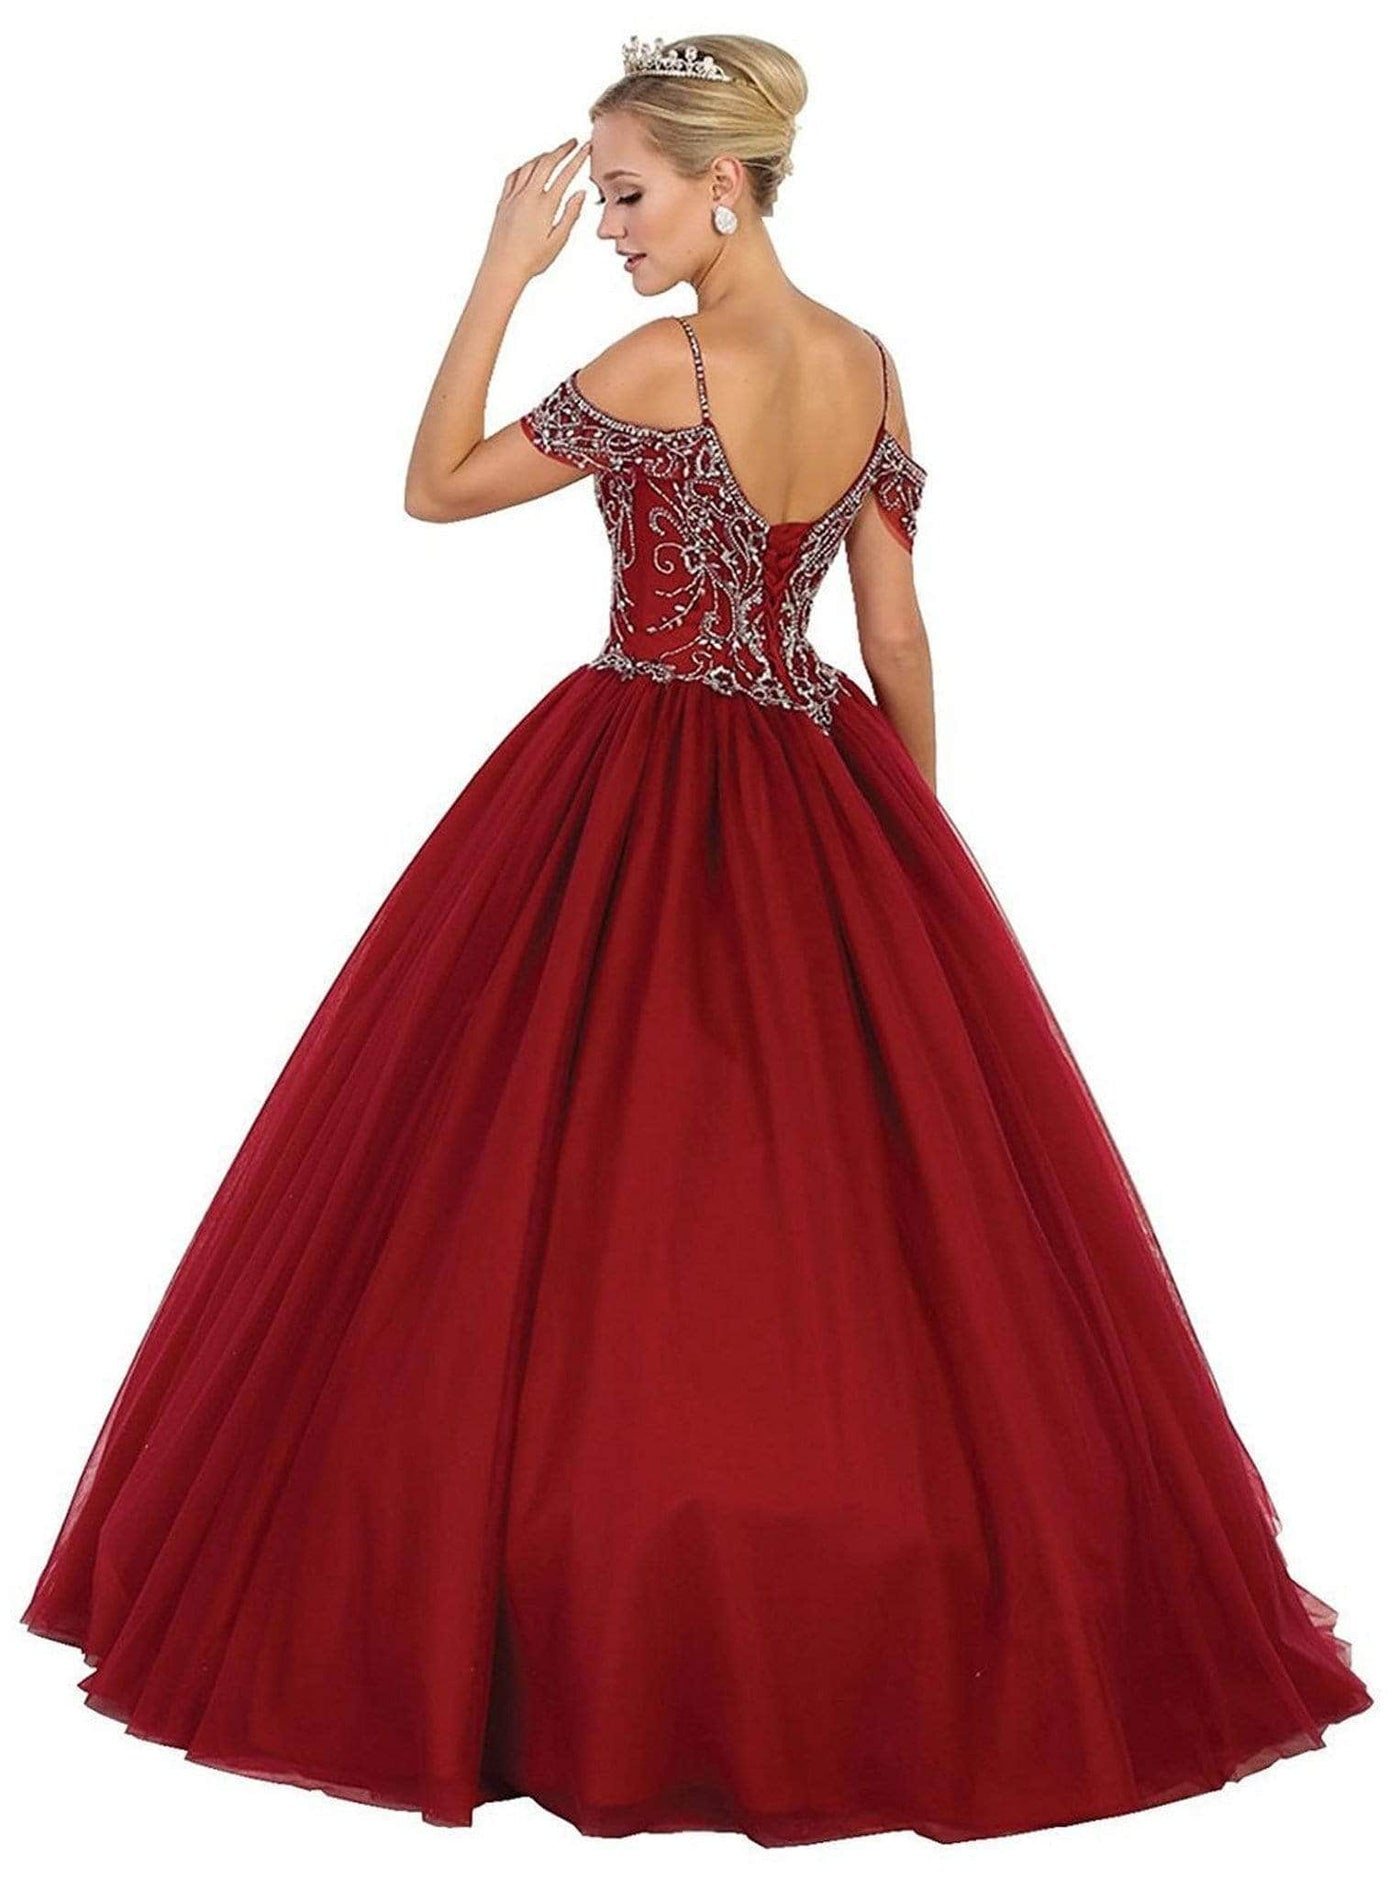 May Queen LK96 - Cold Shoulder Embellished Quinceanera Ballgown Quinceanera Dresses 12 